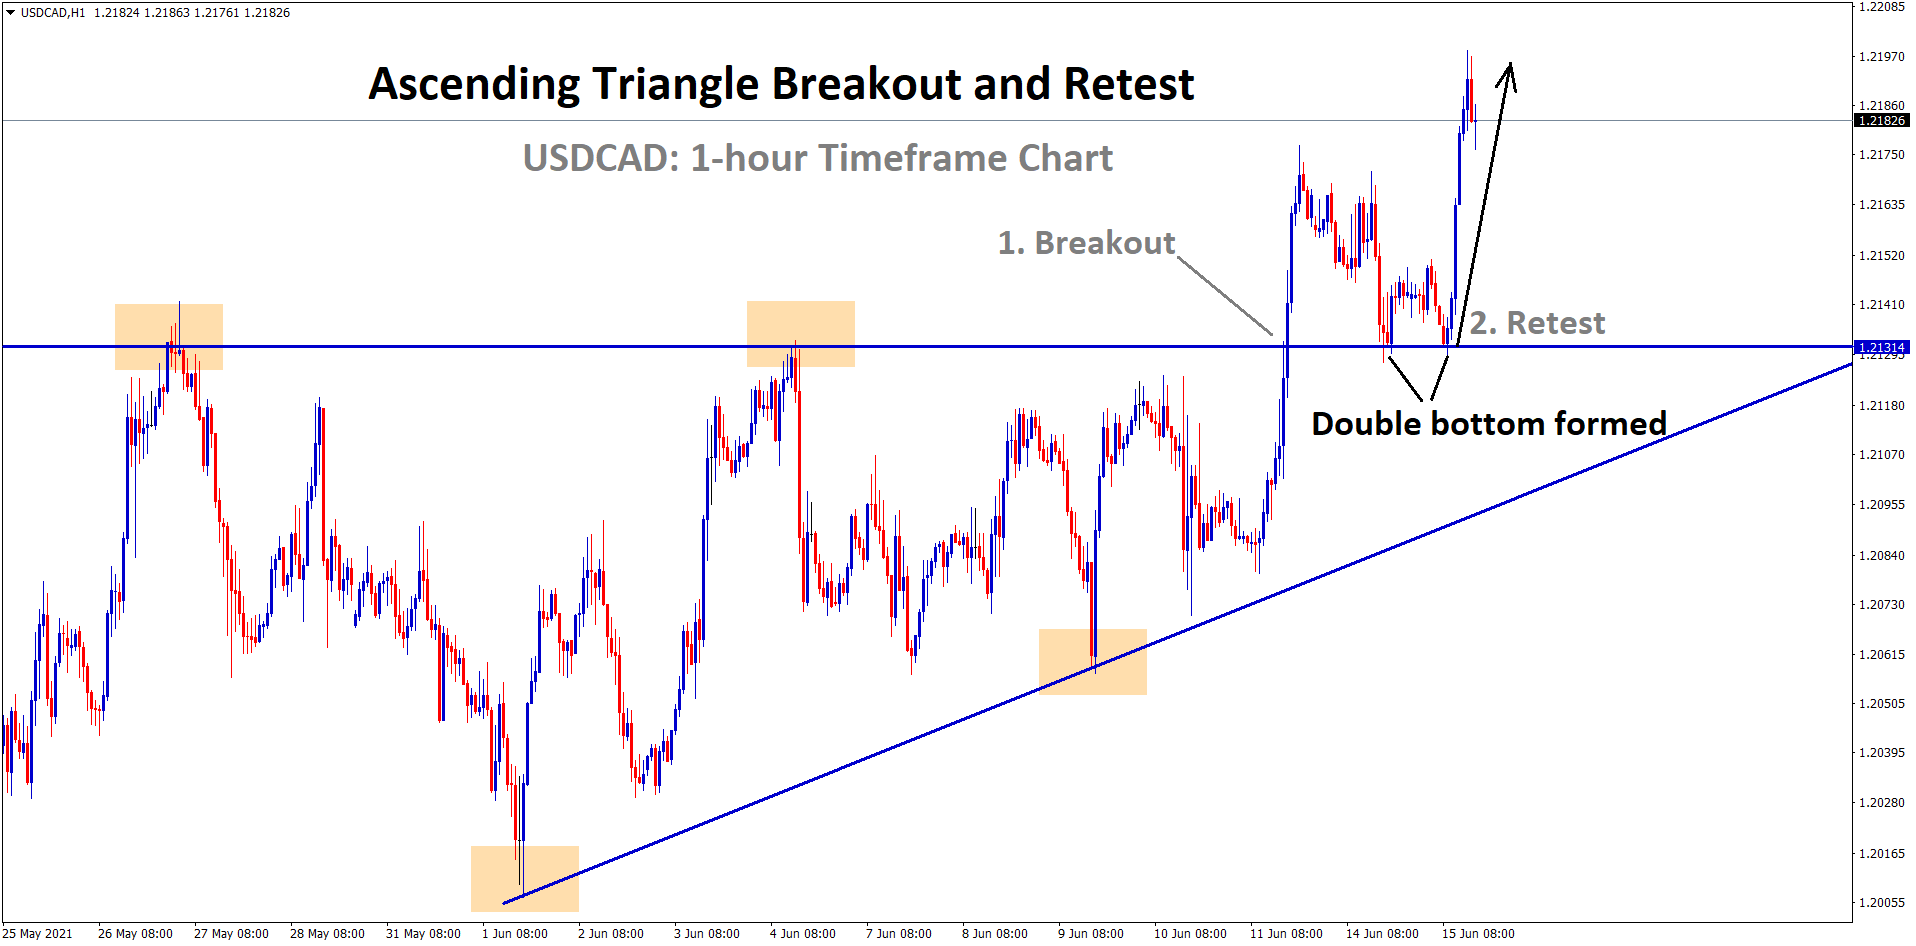 USDCAD bounced back after retesting the broken level of an Ascending Triangle